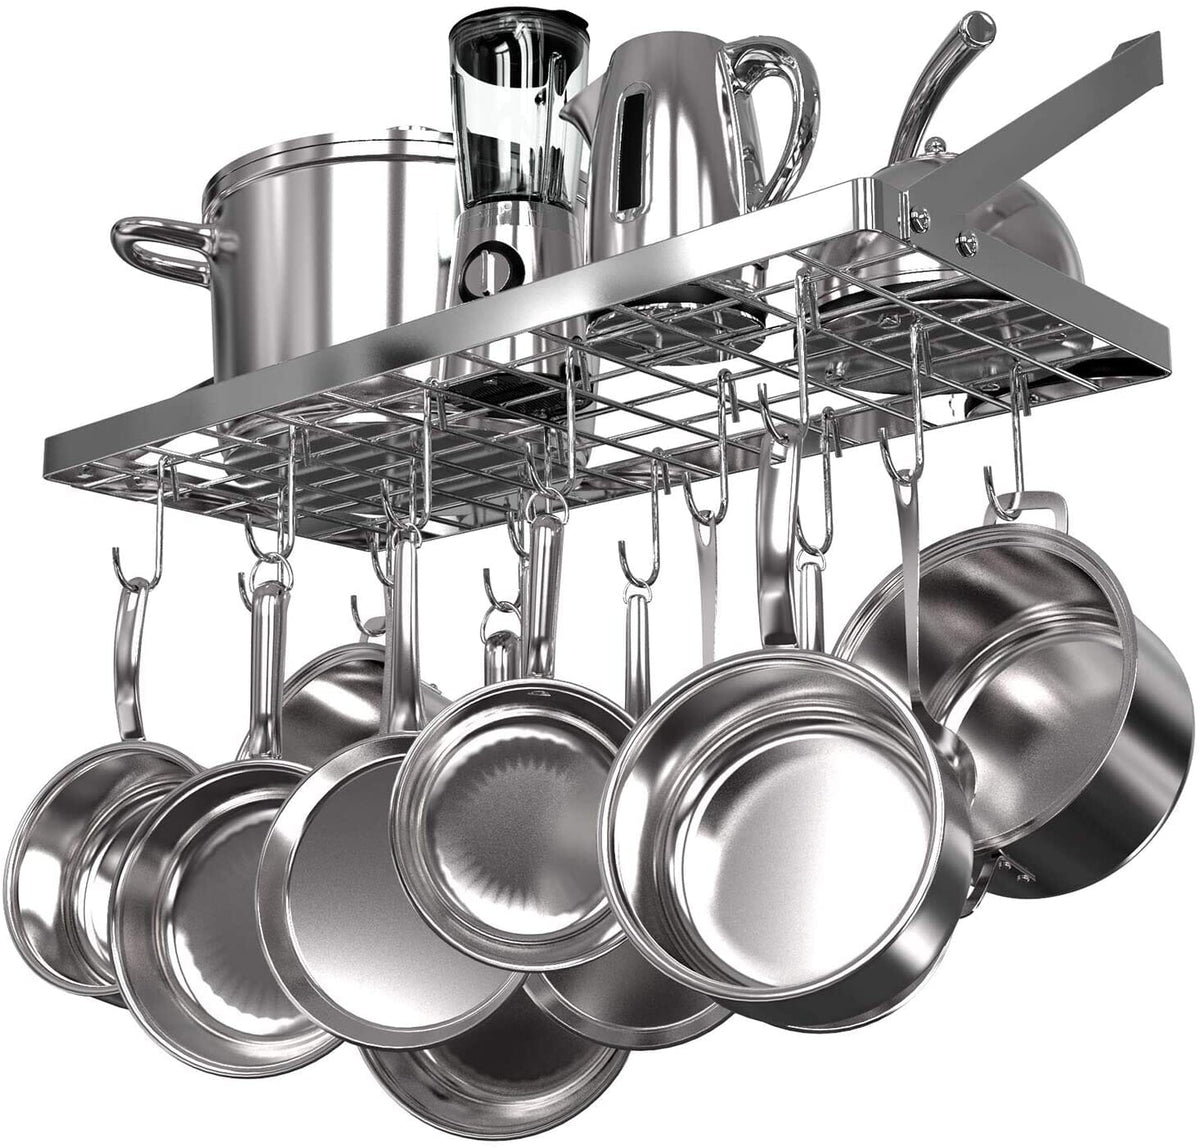 Square Grid Pot Rack - Cookware Organizer with 15 Hooks